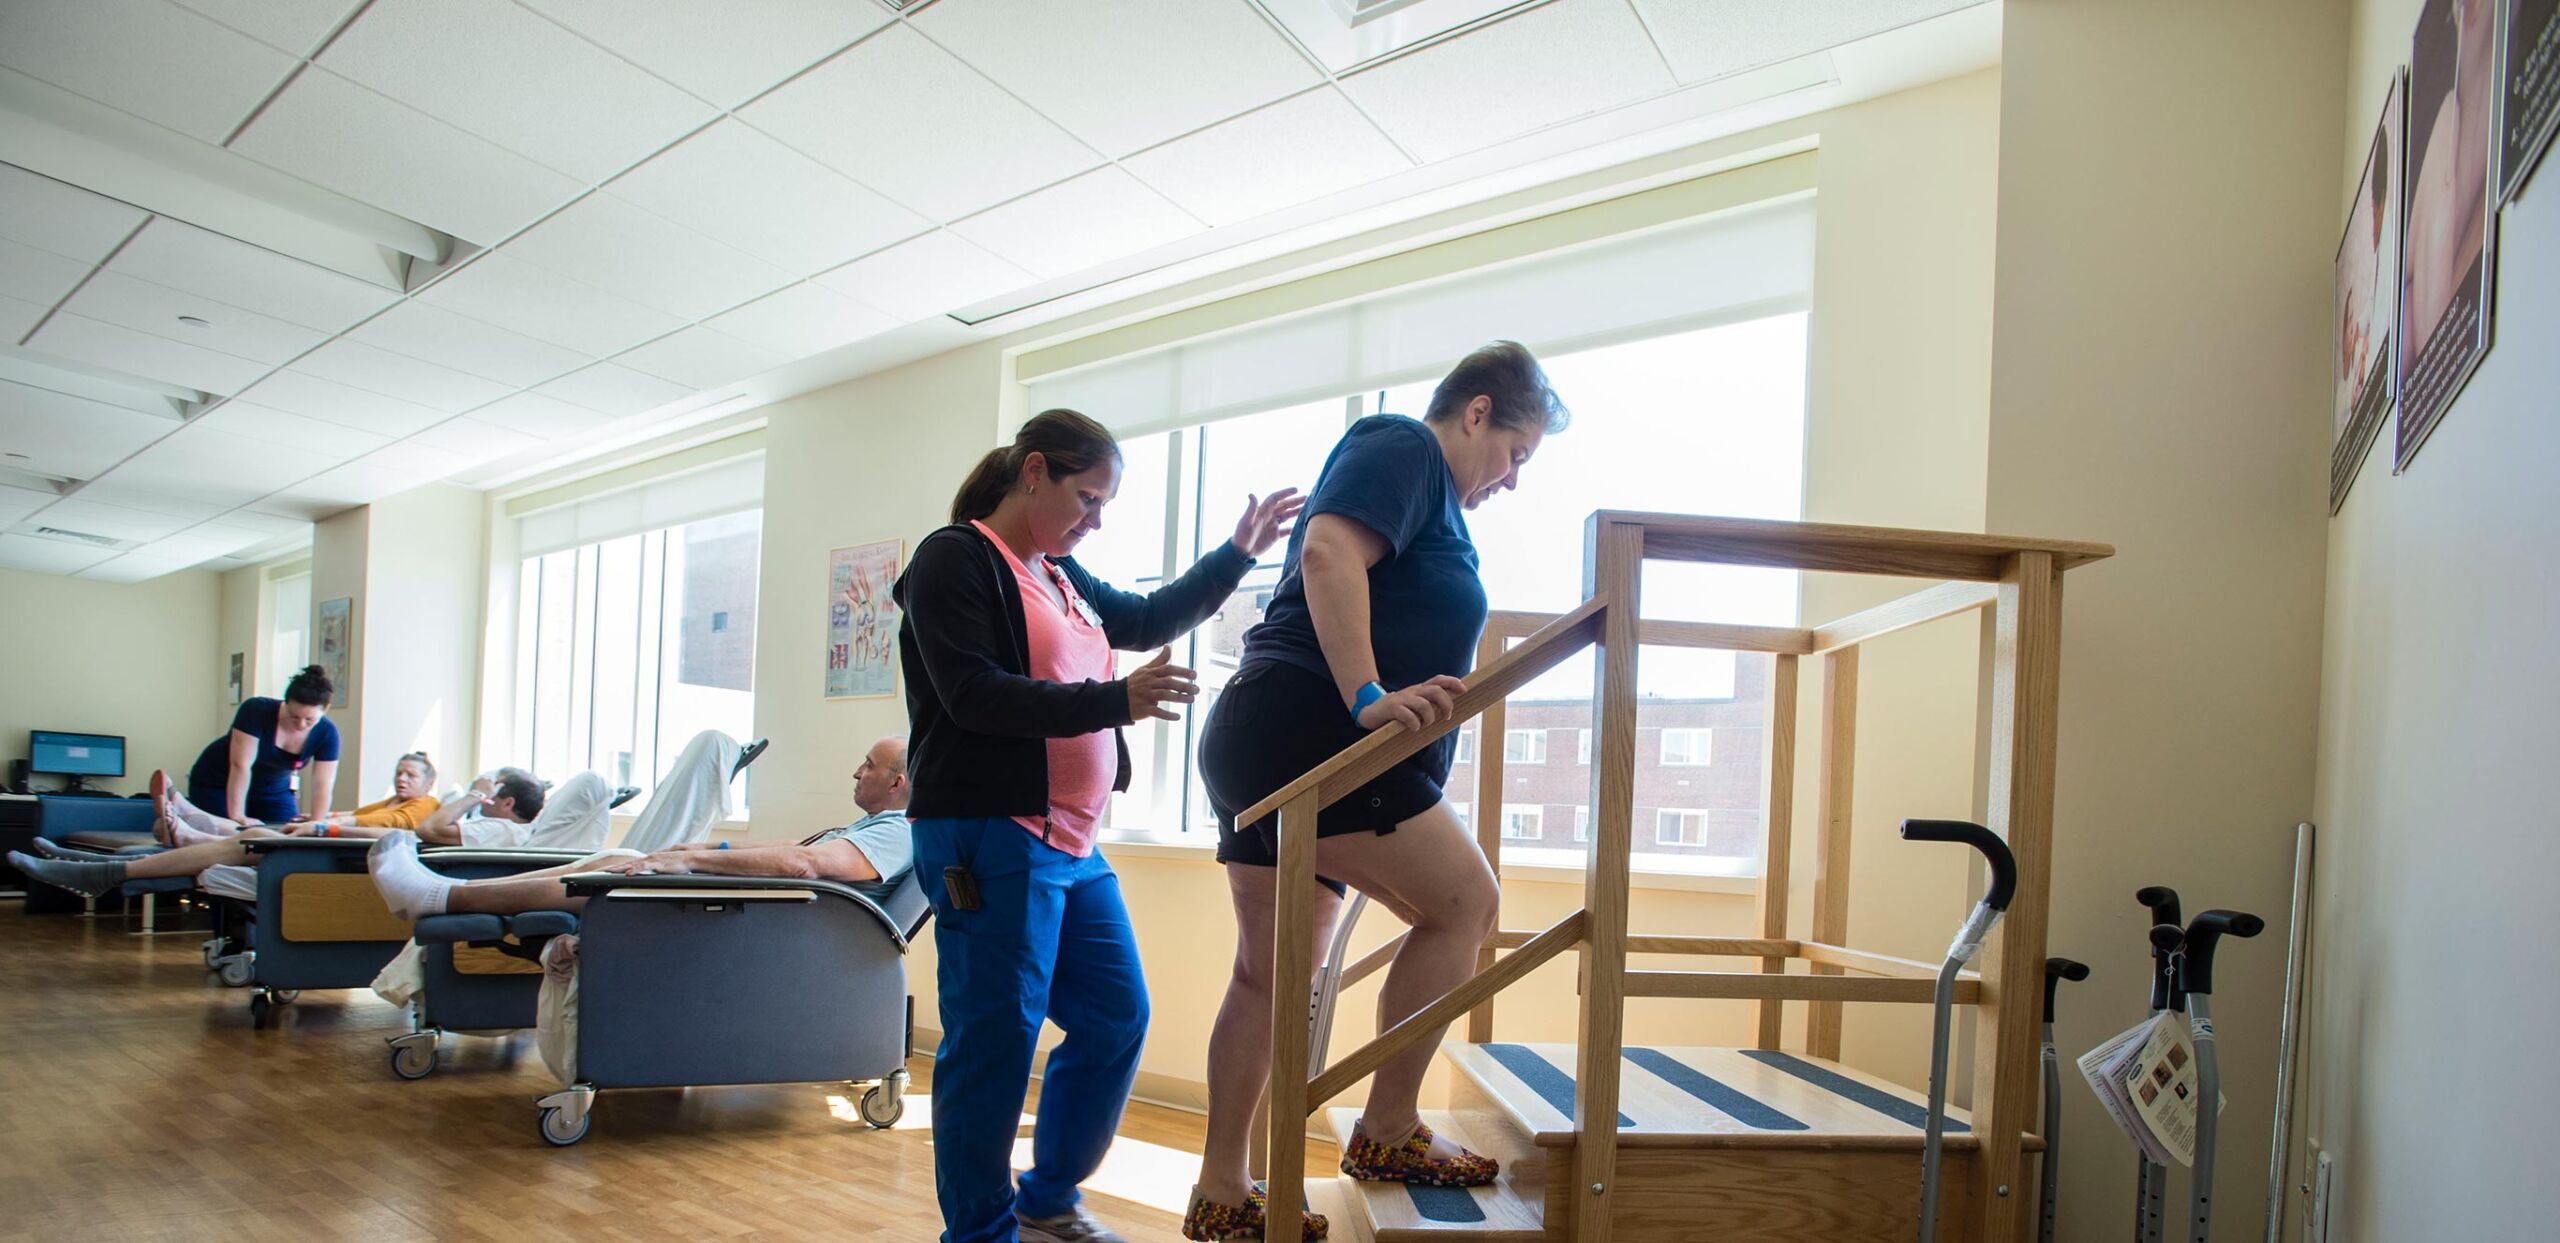 Physical therapist assists a patient as she practices climbing stairs after knee replacement at Cooley Dickinson Medical Group Orthopedics & Sports Medicine, West Hatfield, MA 01088.